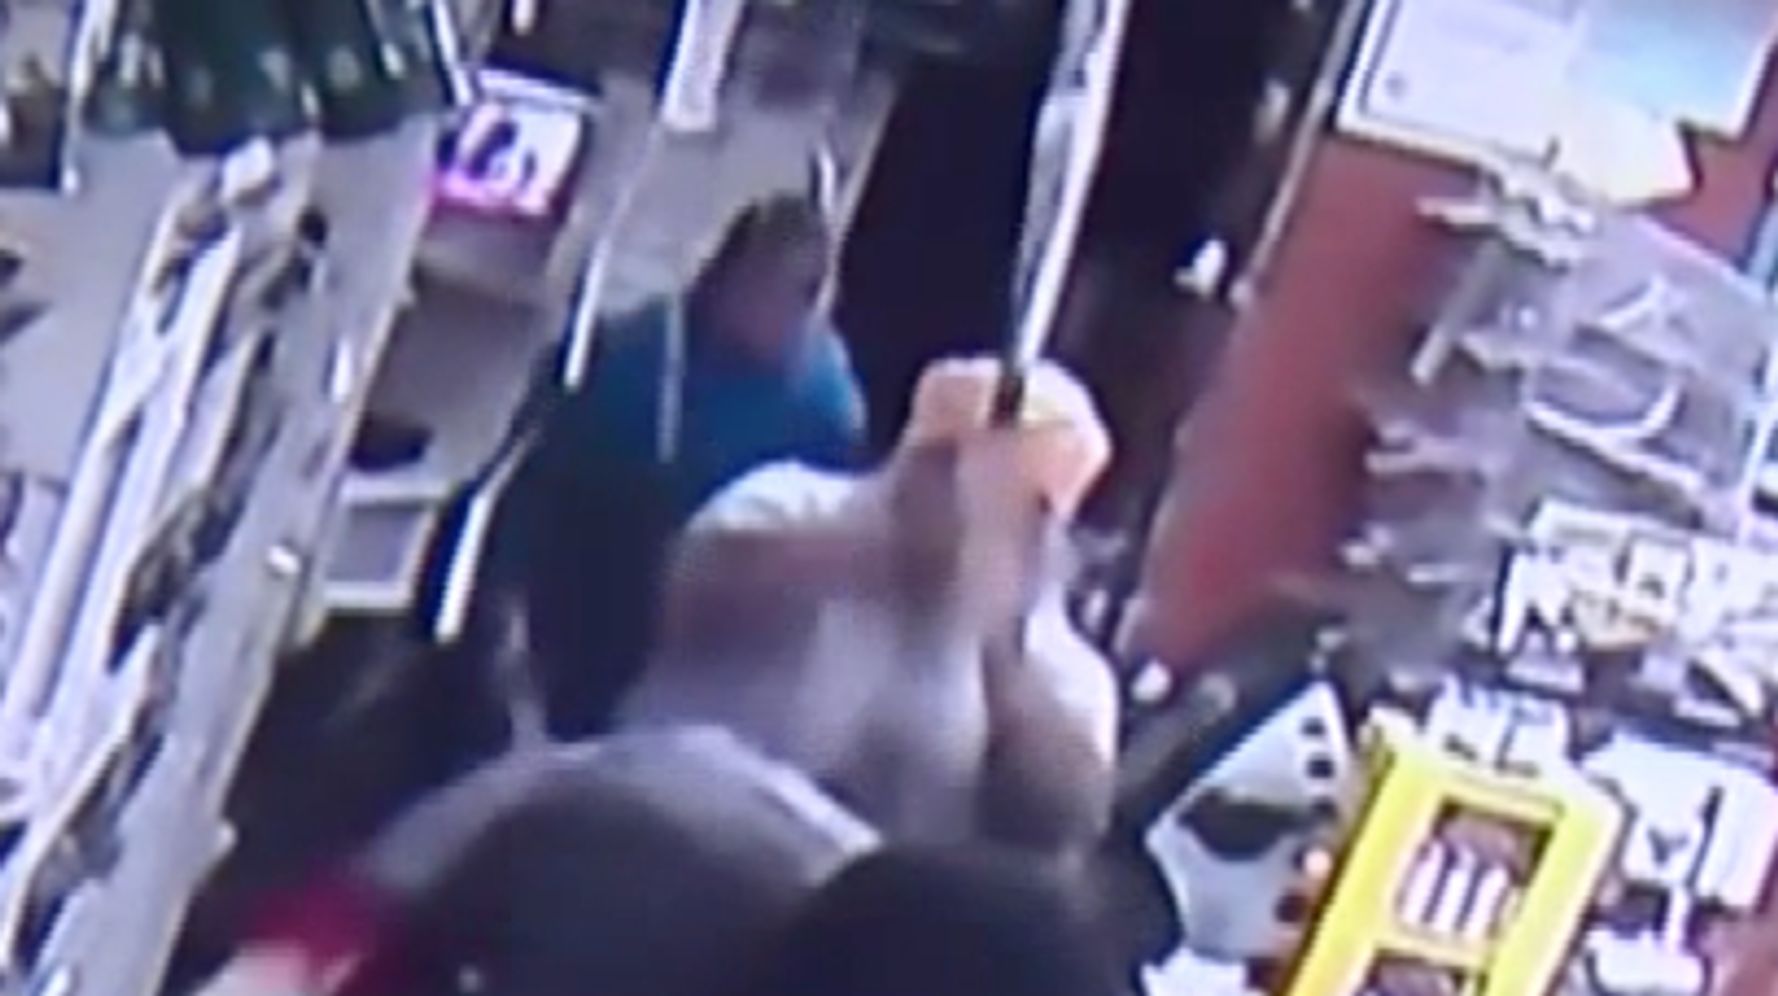 Convenience store owner fights off robber with baseball bat